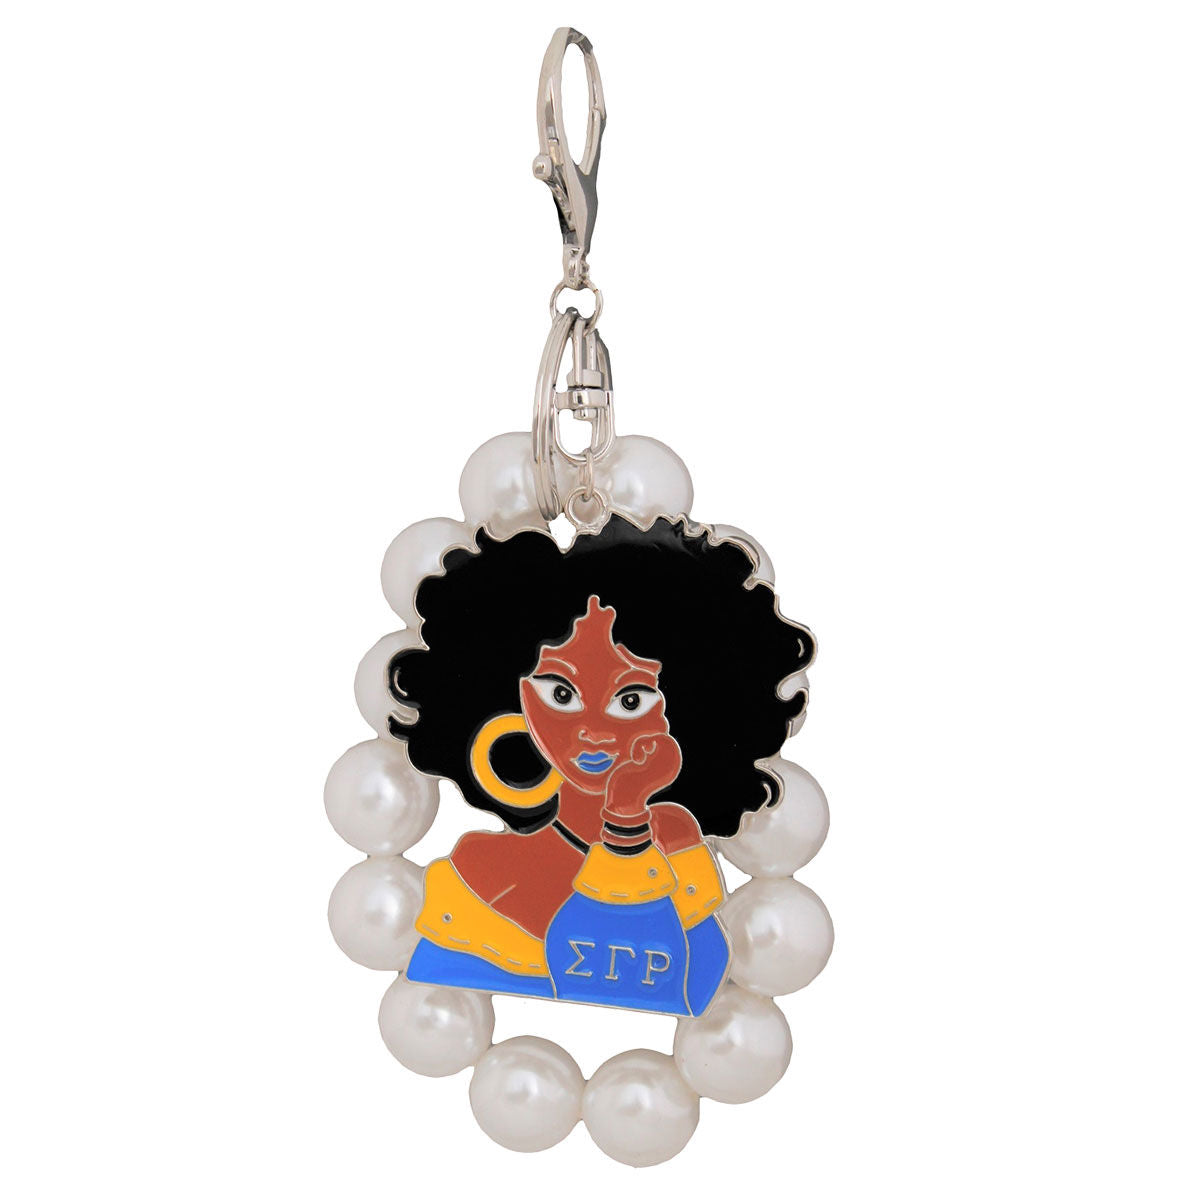 Blue Gold Woman Pearl Keychain